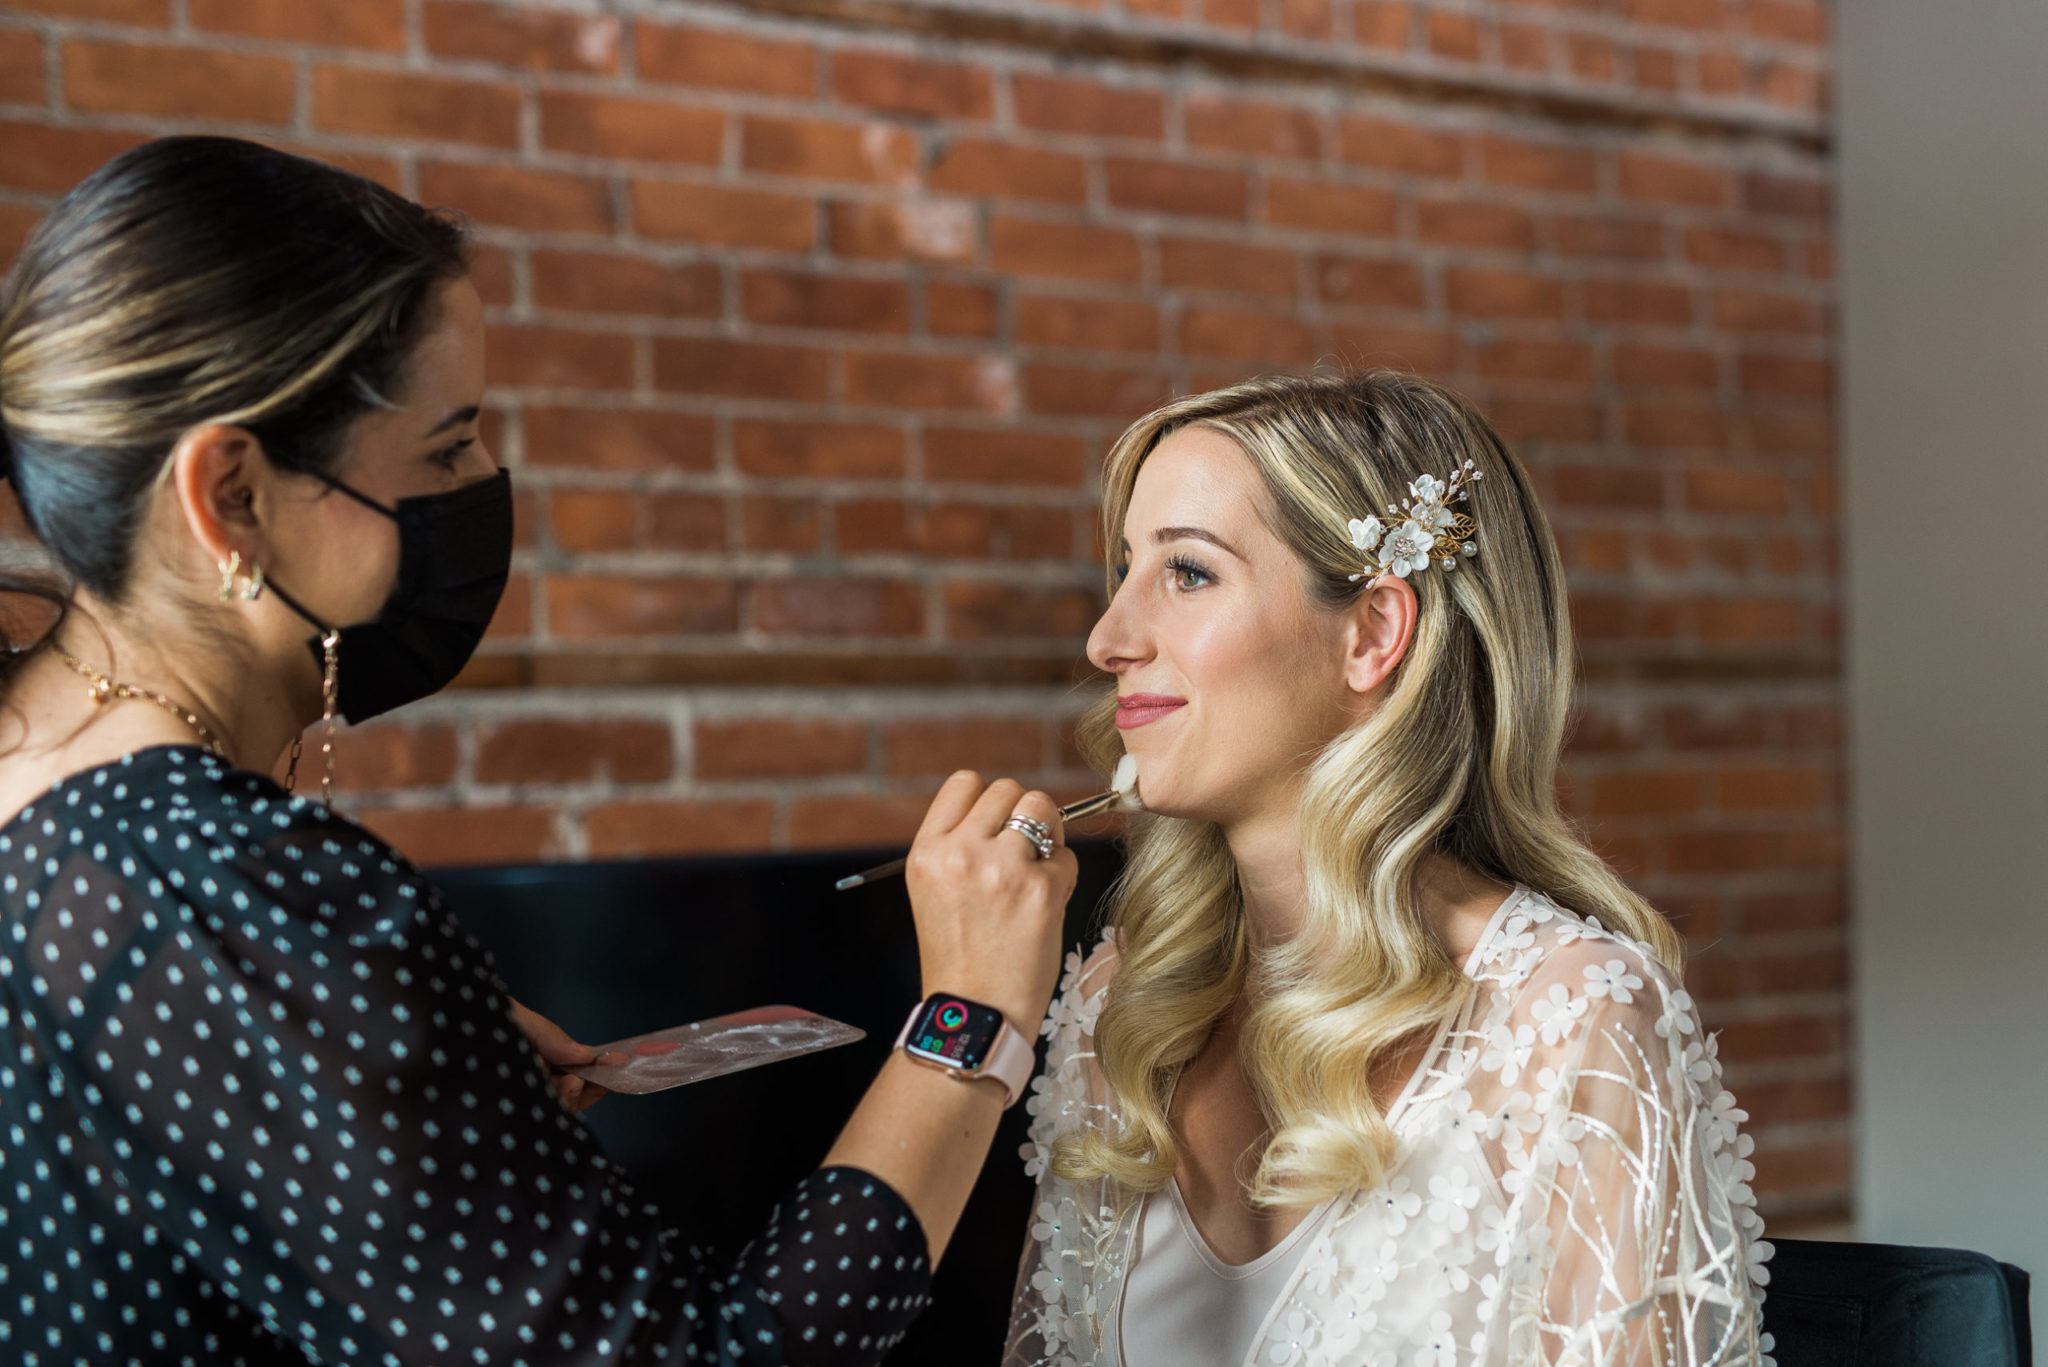 bridal beauty couture doing the bride's makeup on wedding day in detroit michigan